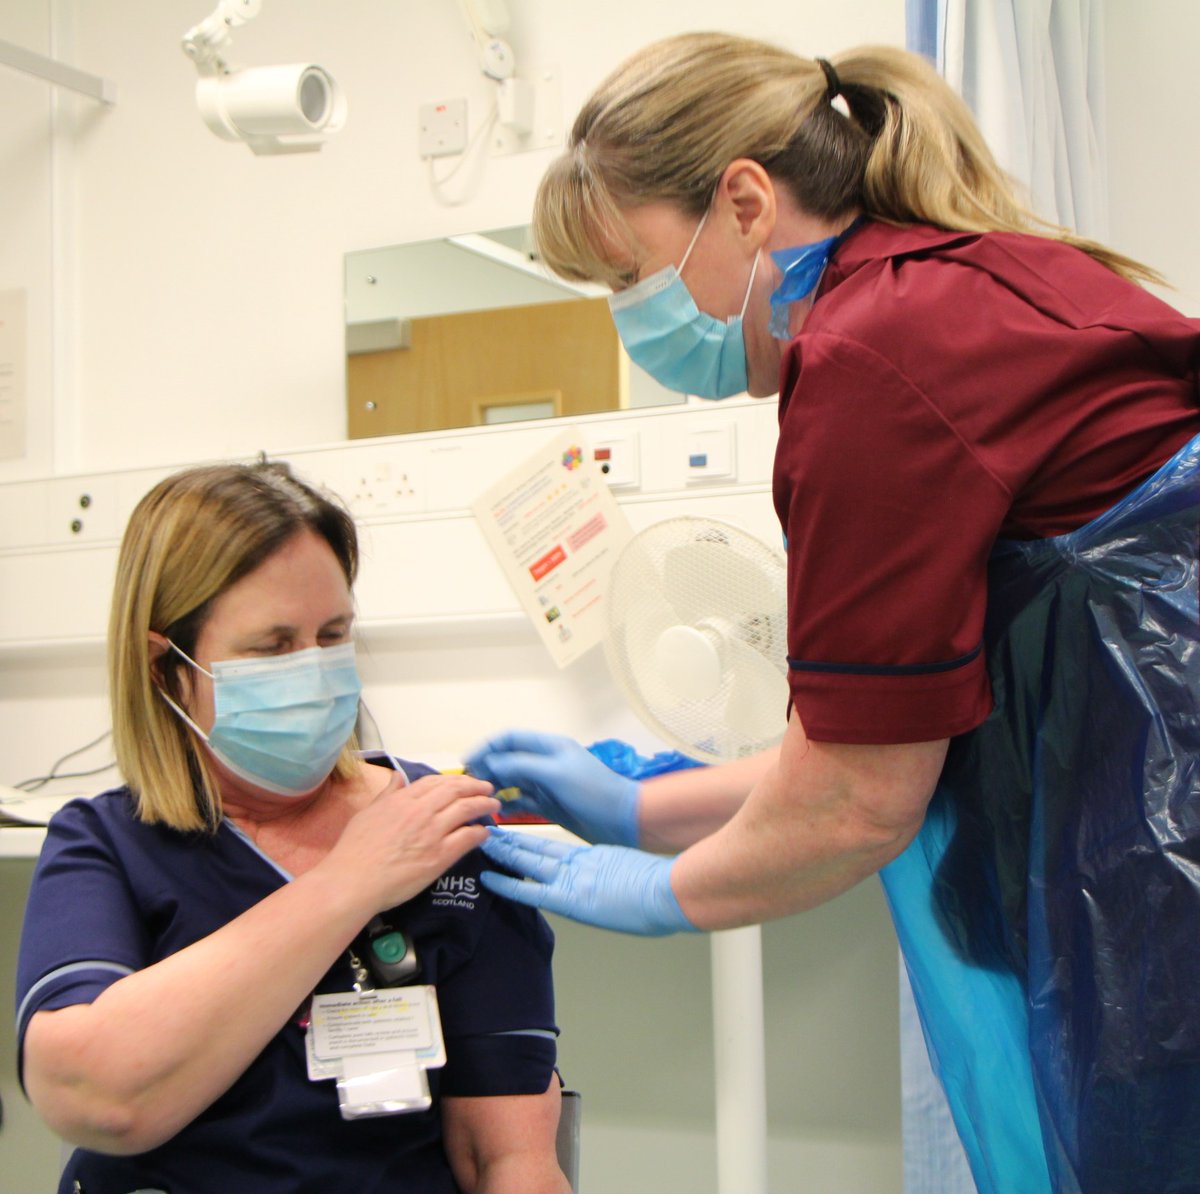 THREAD // The  #COVID19 vaccination programme is underway in  #Grampian, with some of our peer vaccinators receiving their first jabs today. The first wave of the immunisation programme will focus on older adults in care homes, care home staff, and health & social care staff. (1/4)